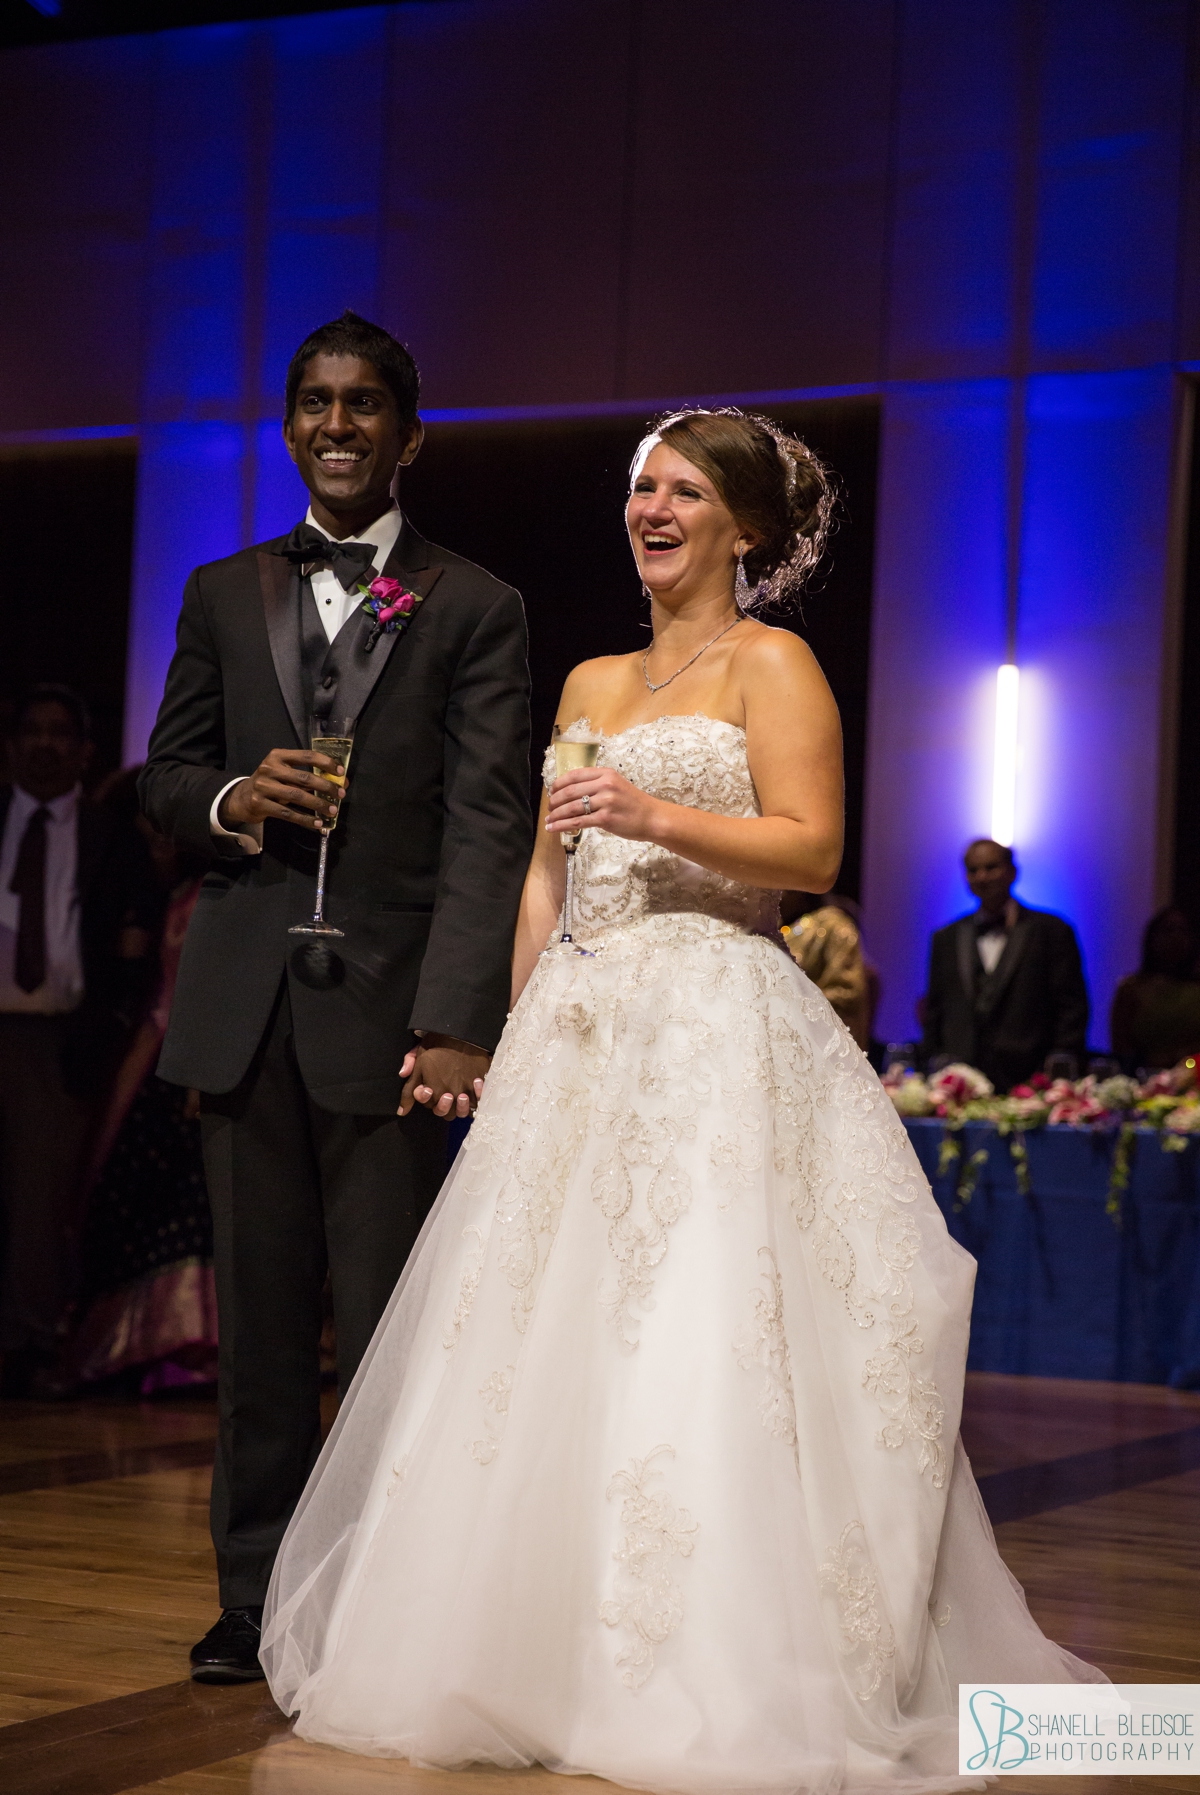 Indian-American wedding reception bride and groom laughing at toast at country music hall of fame